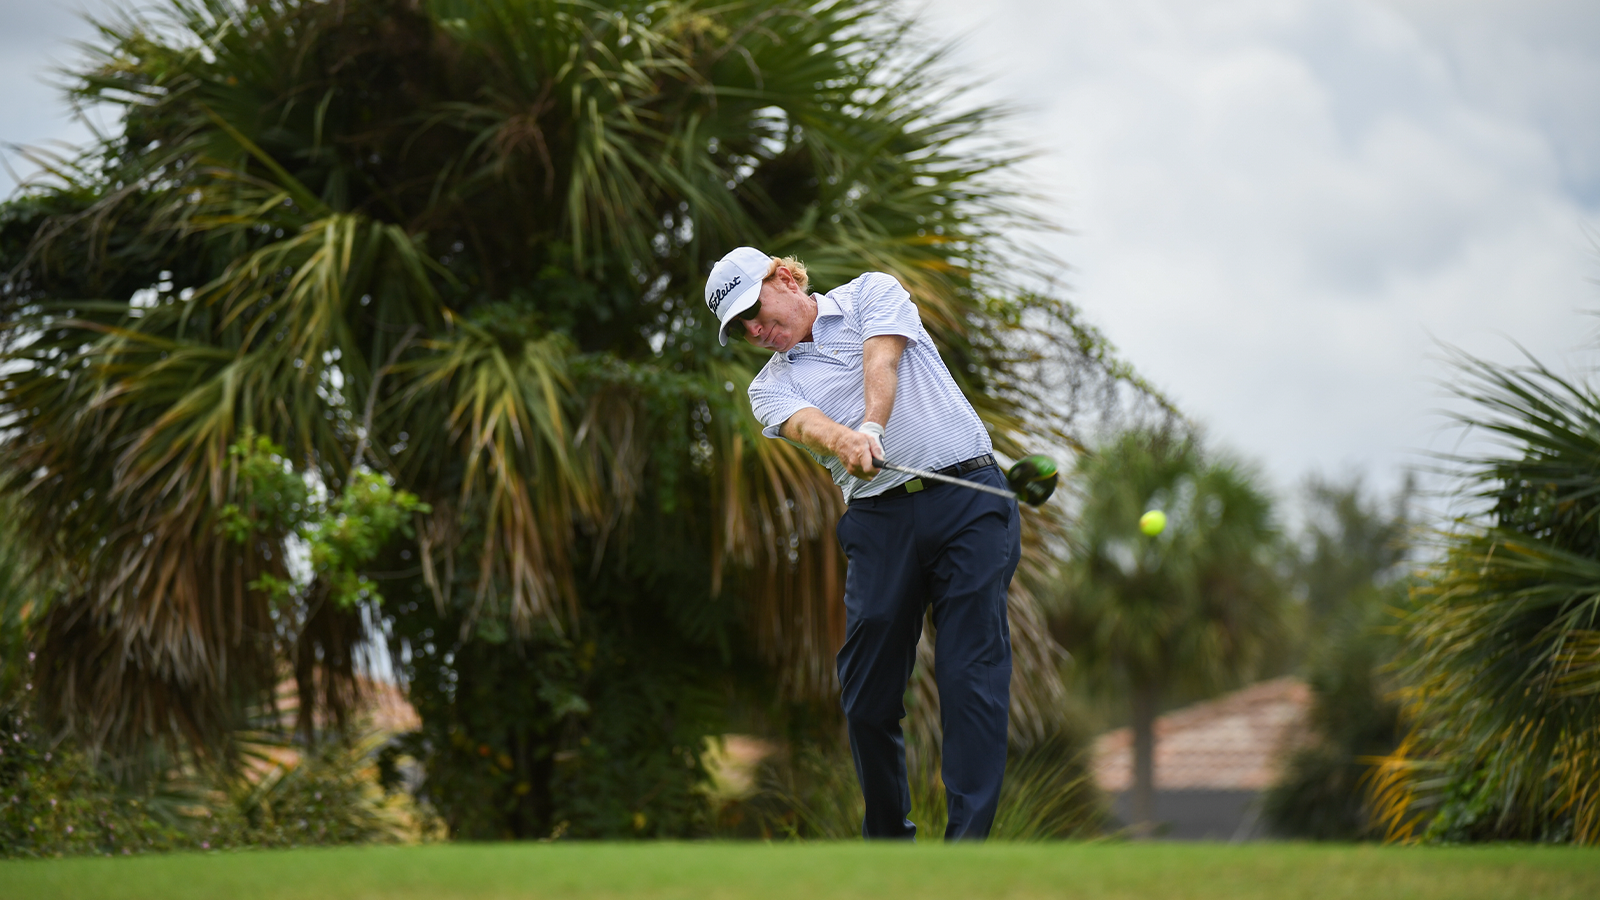 Paul Claxton hits his shot from the seventh tee during the final round of the 33rd Senior PGA Professional Championship held at the PGA Golf Club on October 24, 2021 in Port St. Lucie, Florida. (Photo by Montana Pritchard/PGA of America)